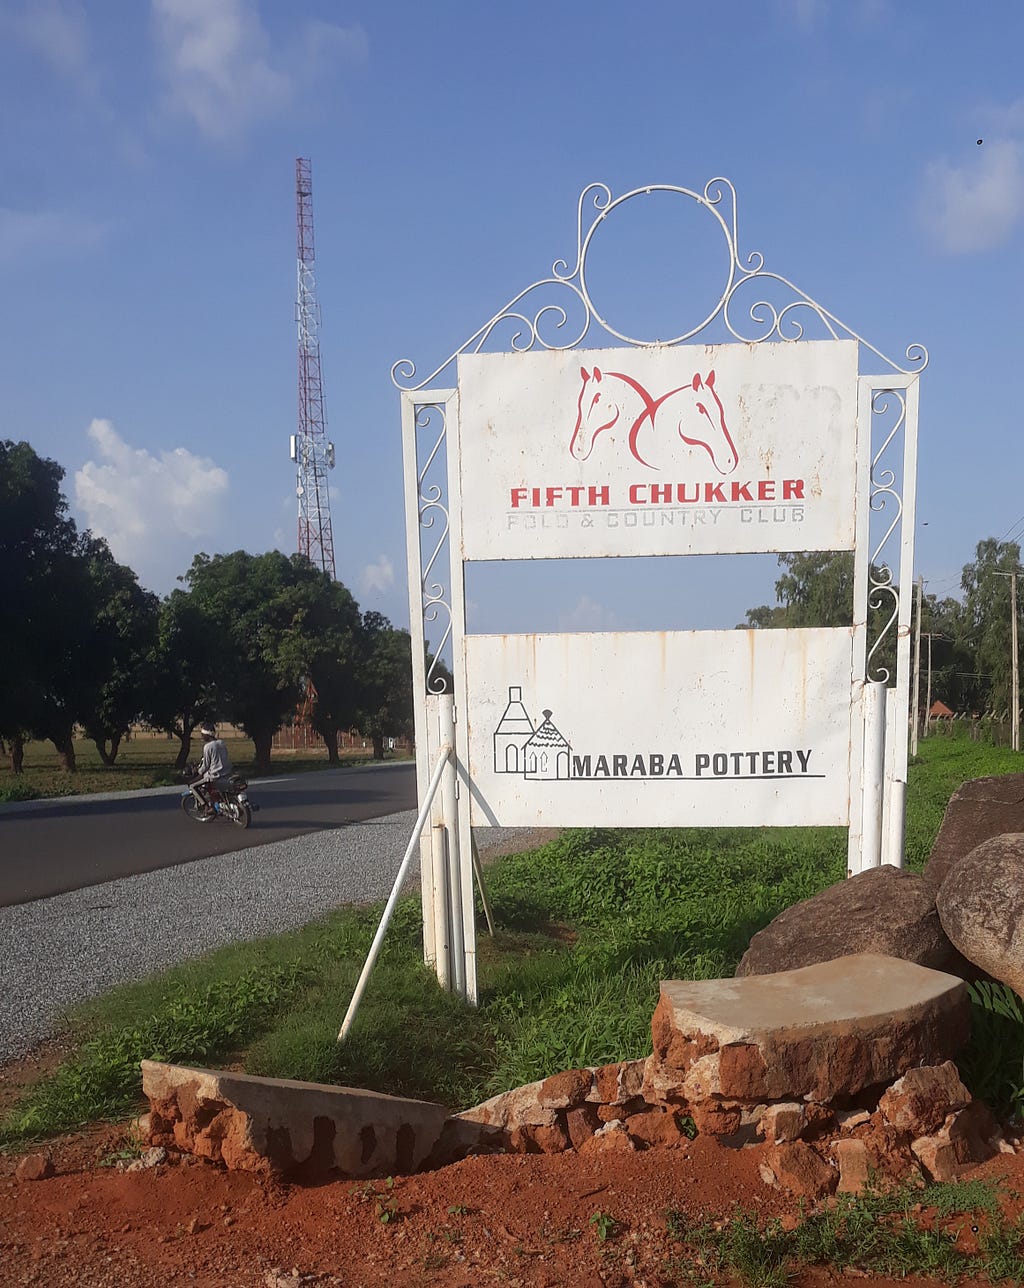 Fifth Chukker’s signage by the roadside